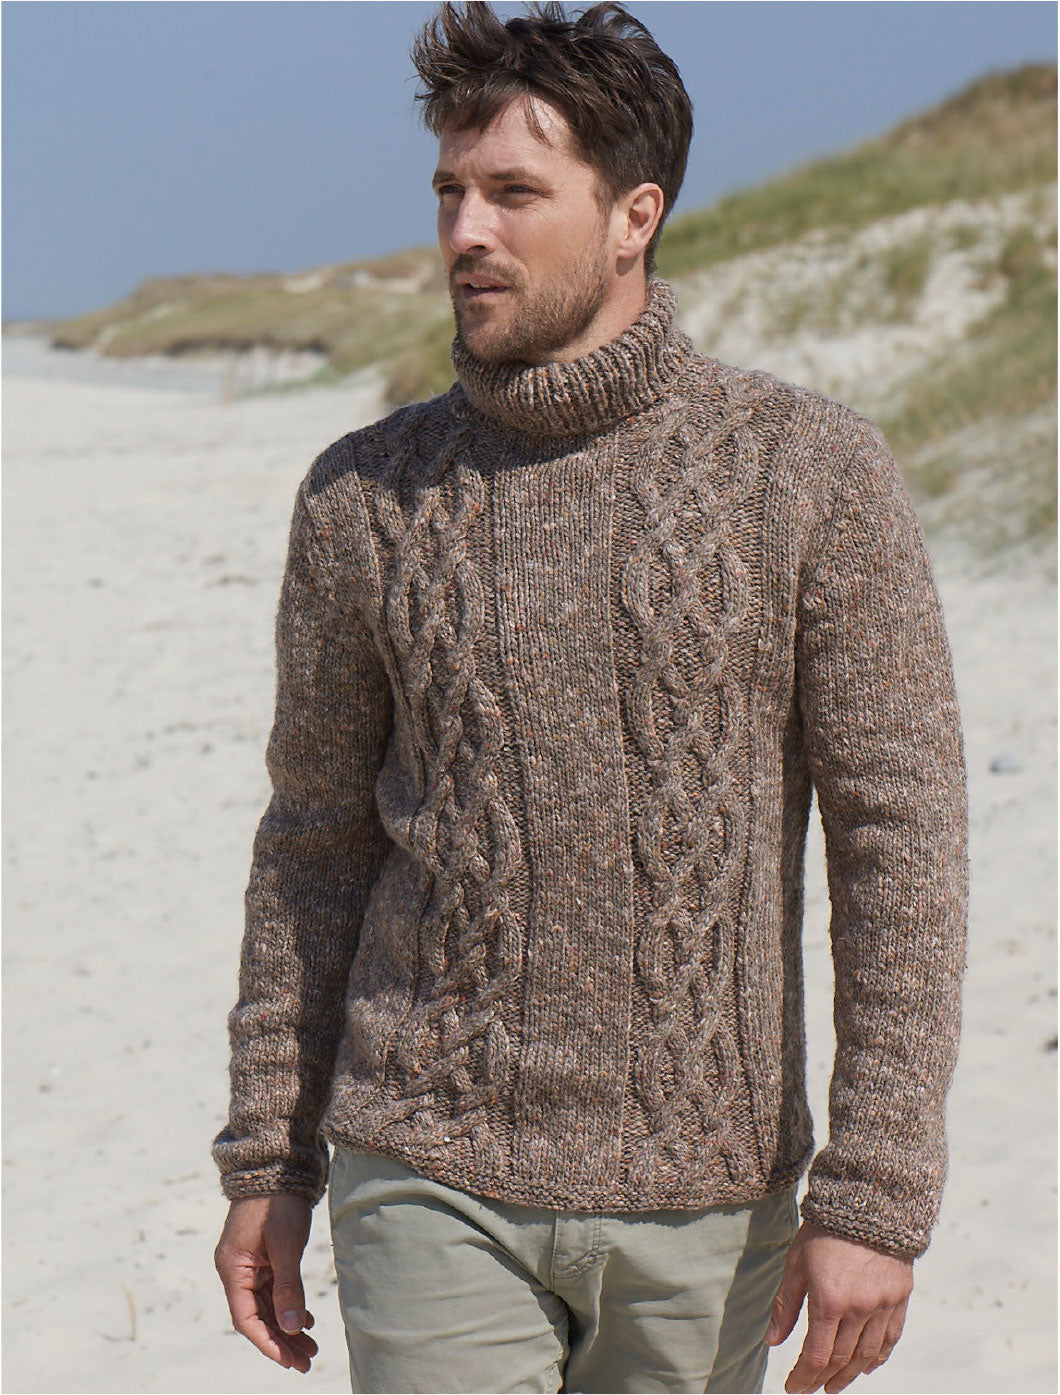 FREE Knitting Pattern - Orion Cable Sweater